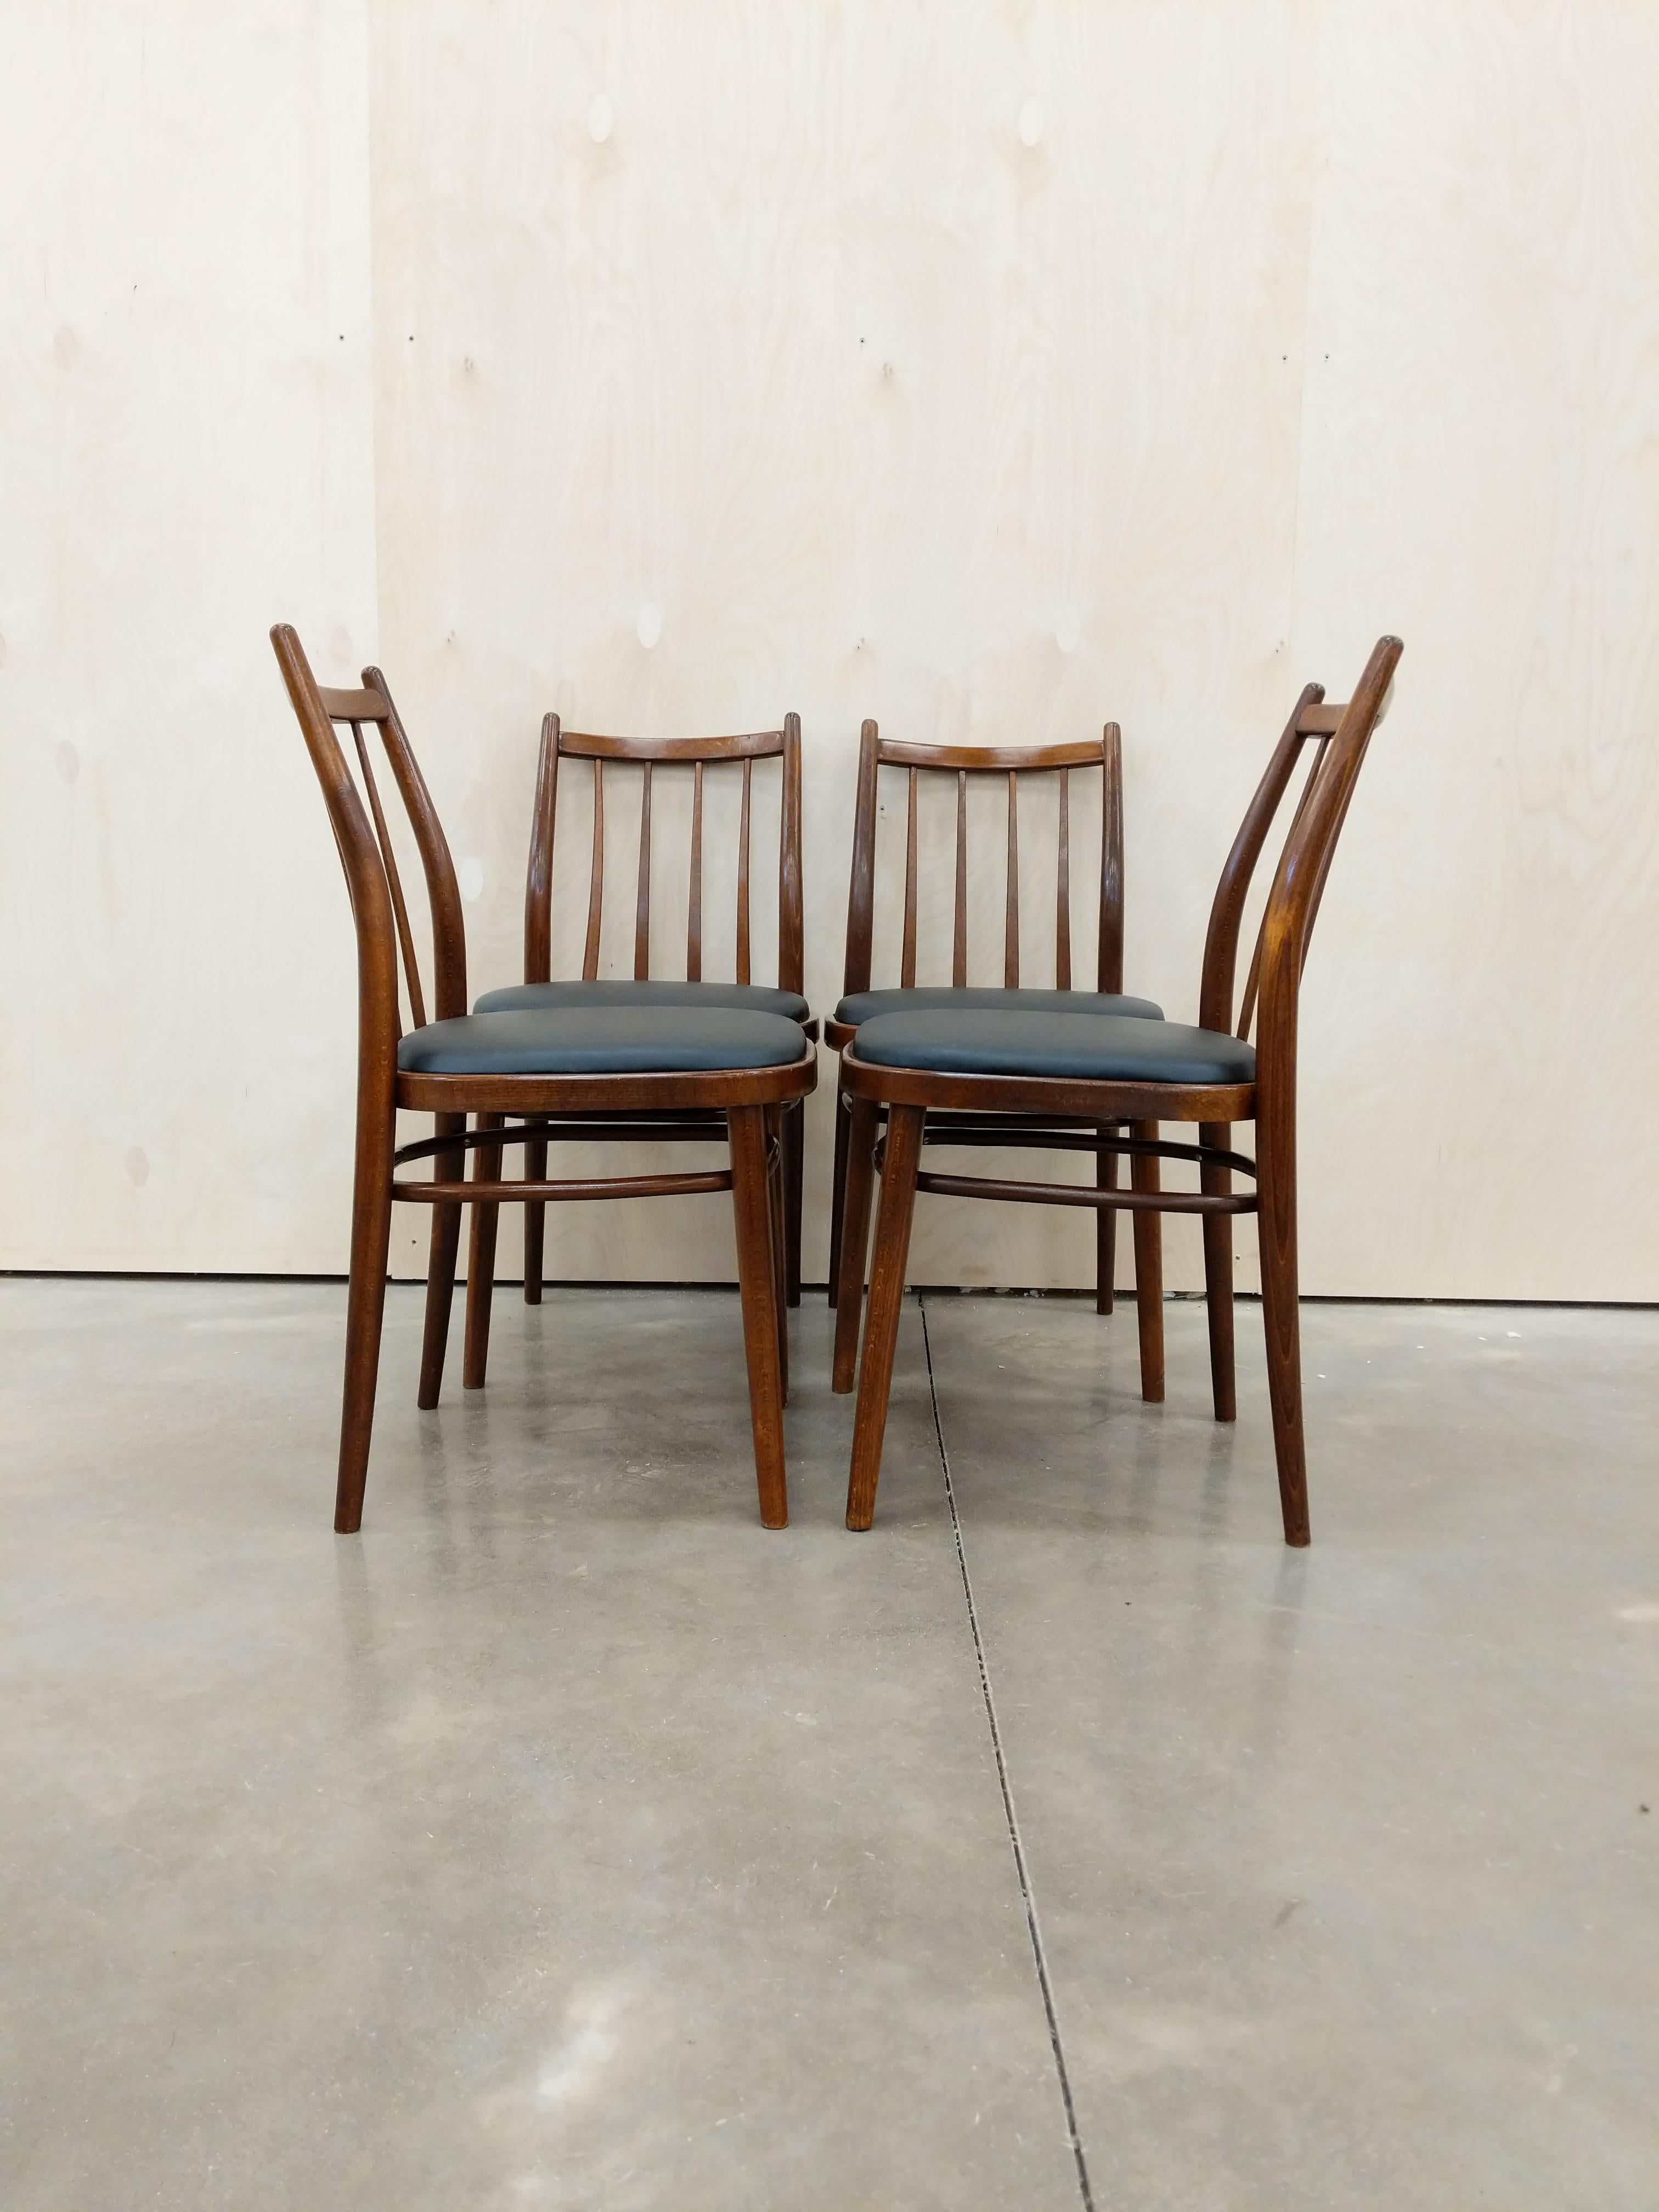 Set of 4 authentic vintage Czech mid century modern dining chairs.

By UP Zavody Rousinov. Maker's label on bottom.

This set is in excellent vintage condition with brand new upholstery (see photos).

If you would like any additional details, please